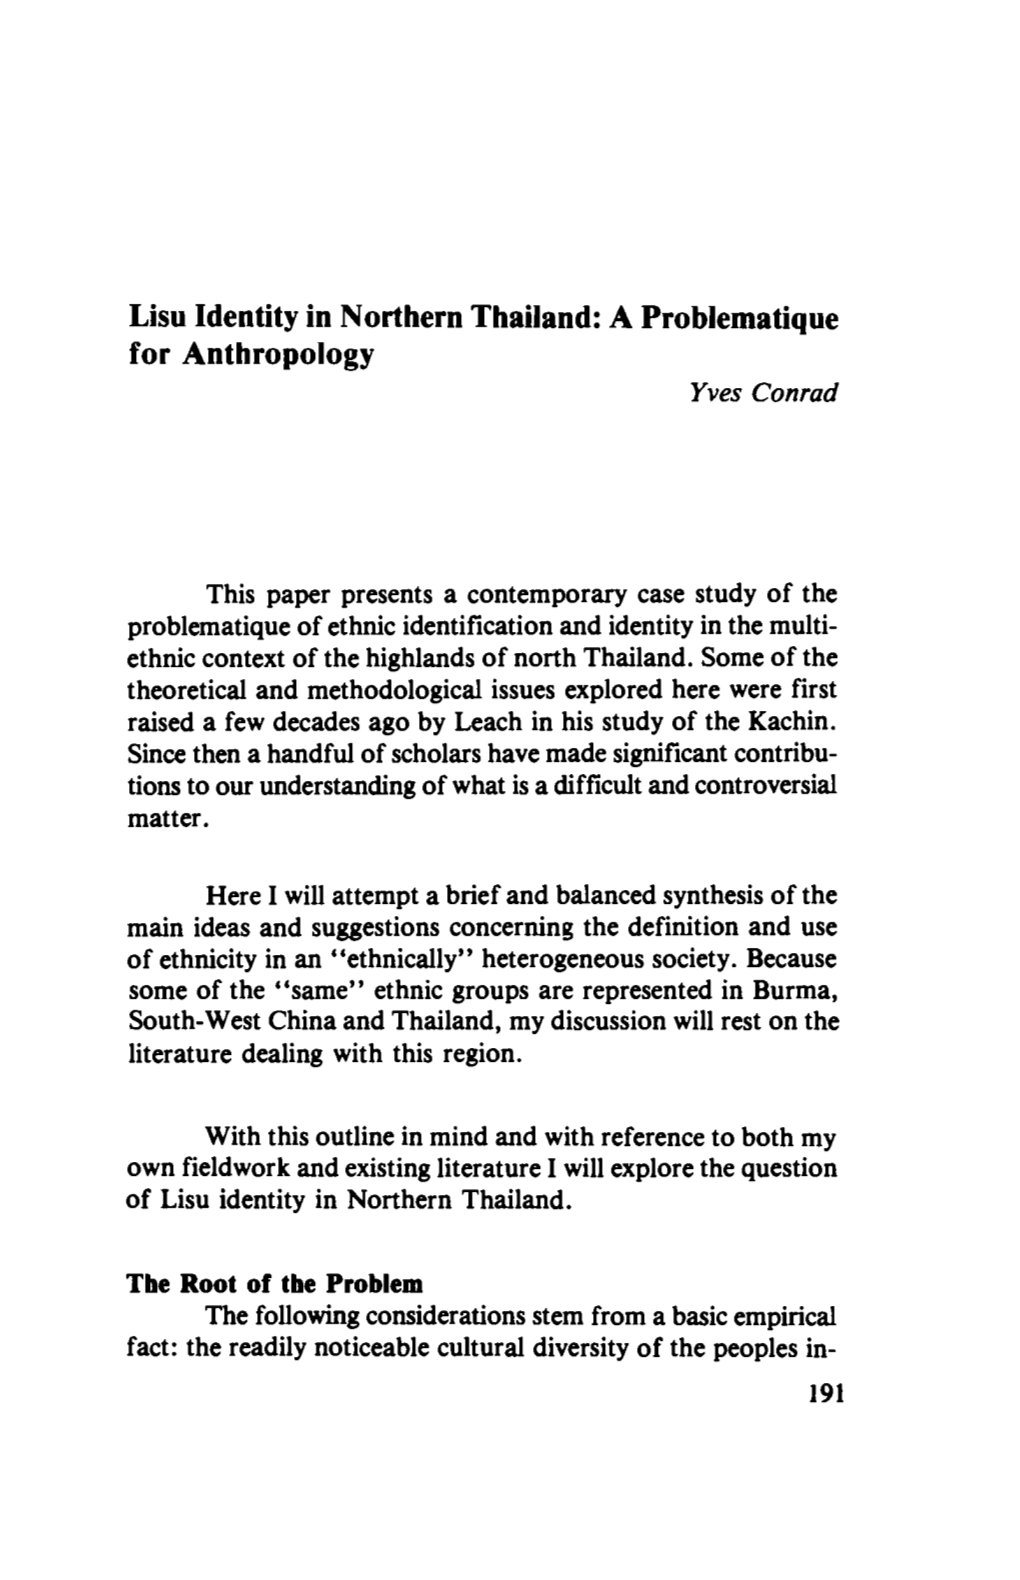 Lisu Identity in Northern Thailand: a Problematique for Anthropology Yves Conrad